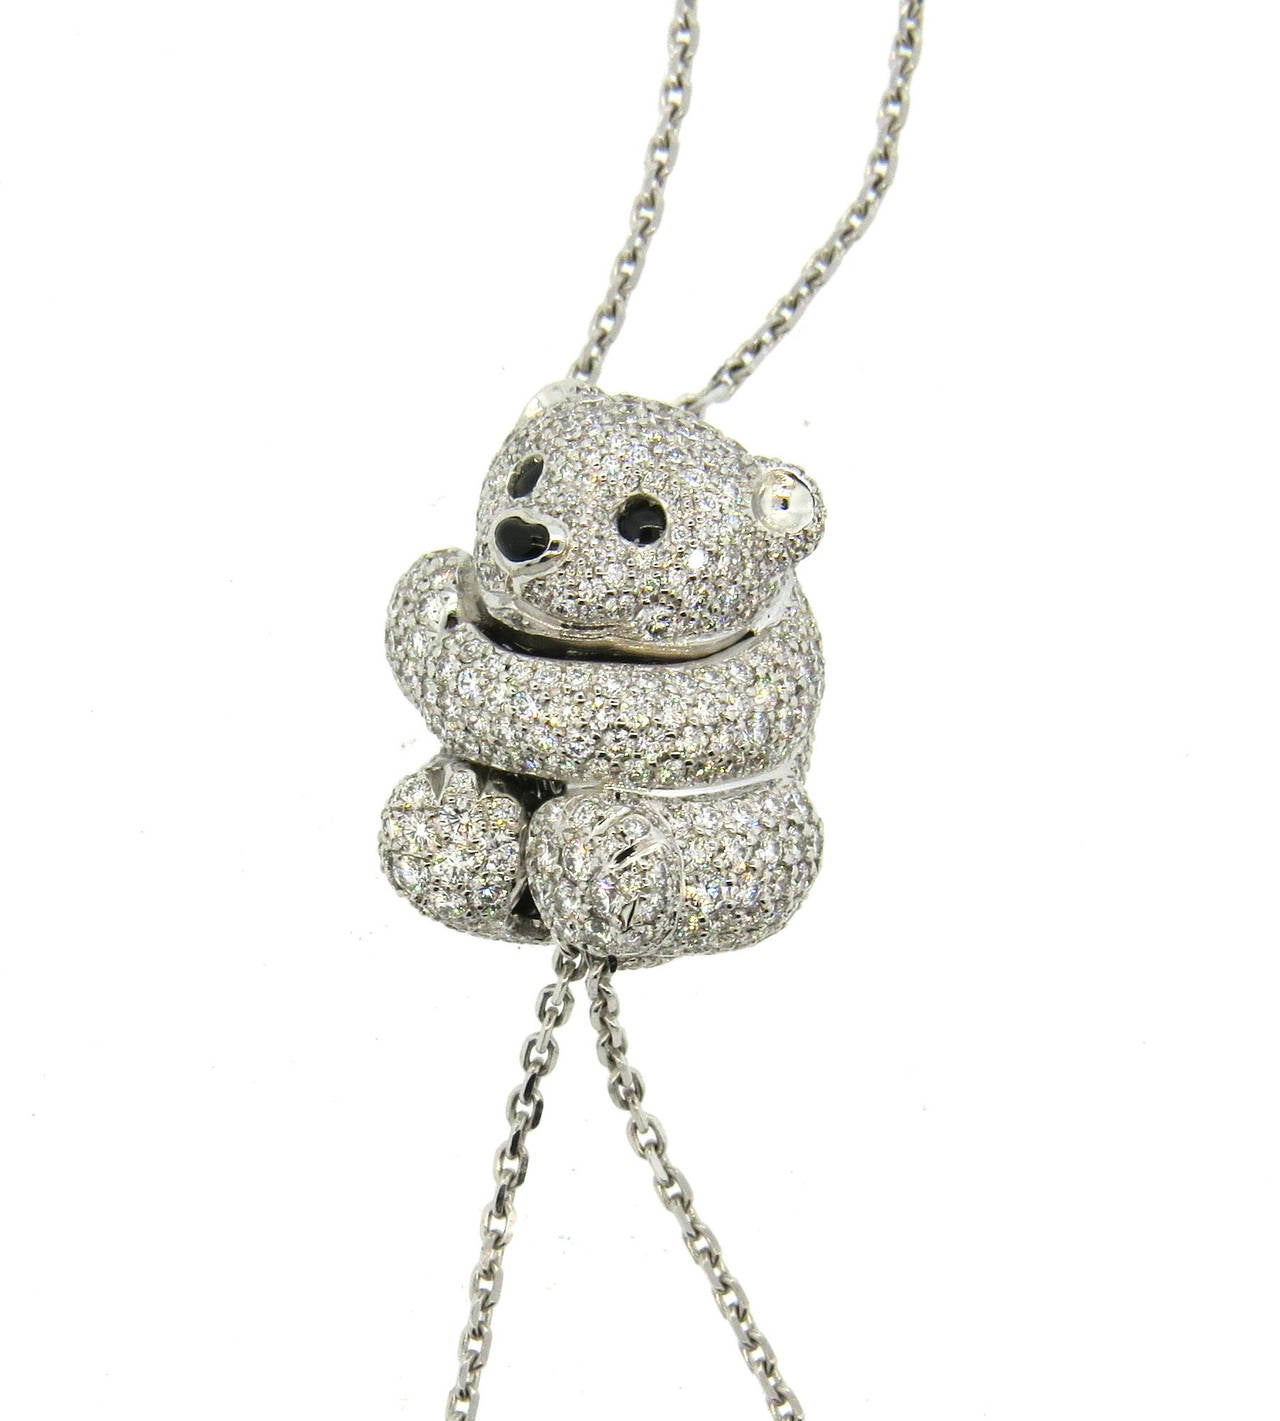 18k white gold chain, featuring bear pendant, crafted in all diamonds (total of 3.85ctw VVS/FG) Necklace is 24